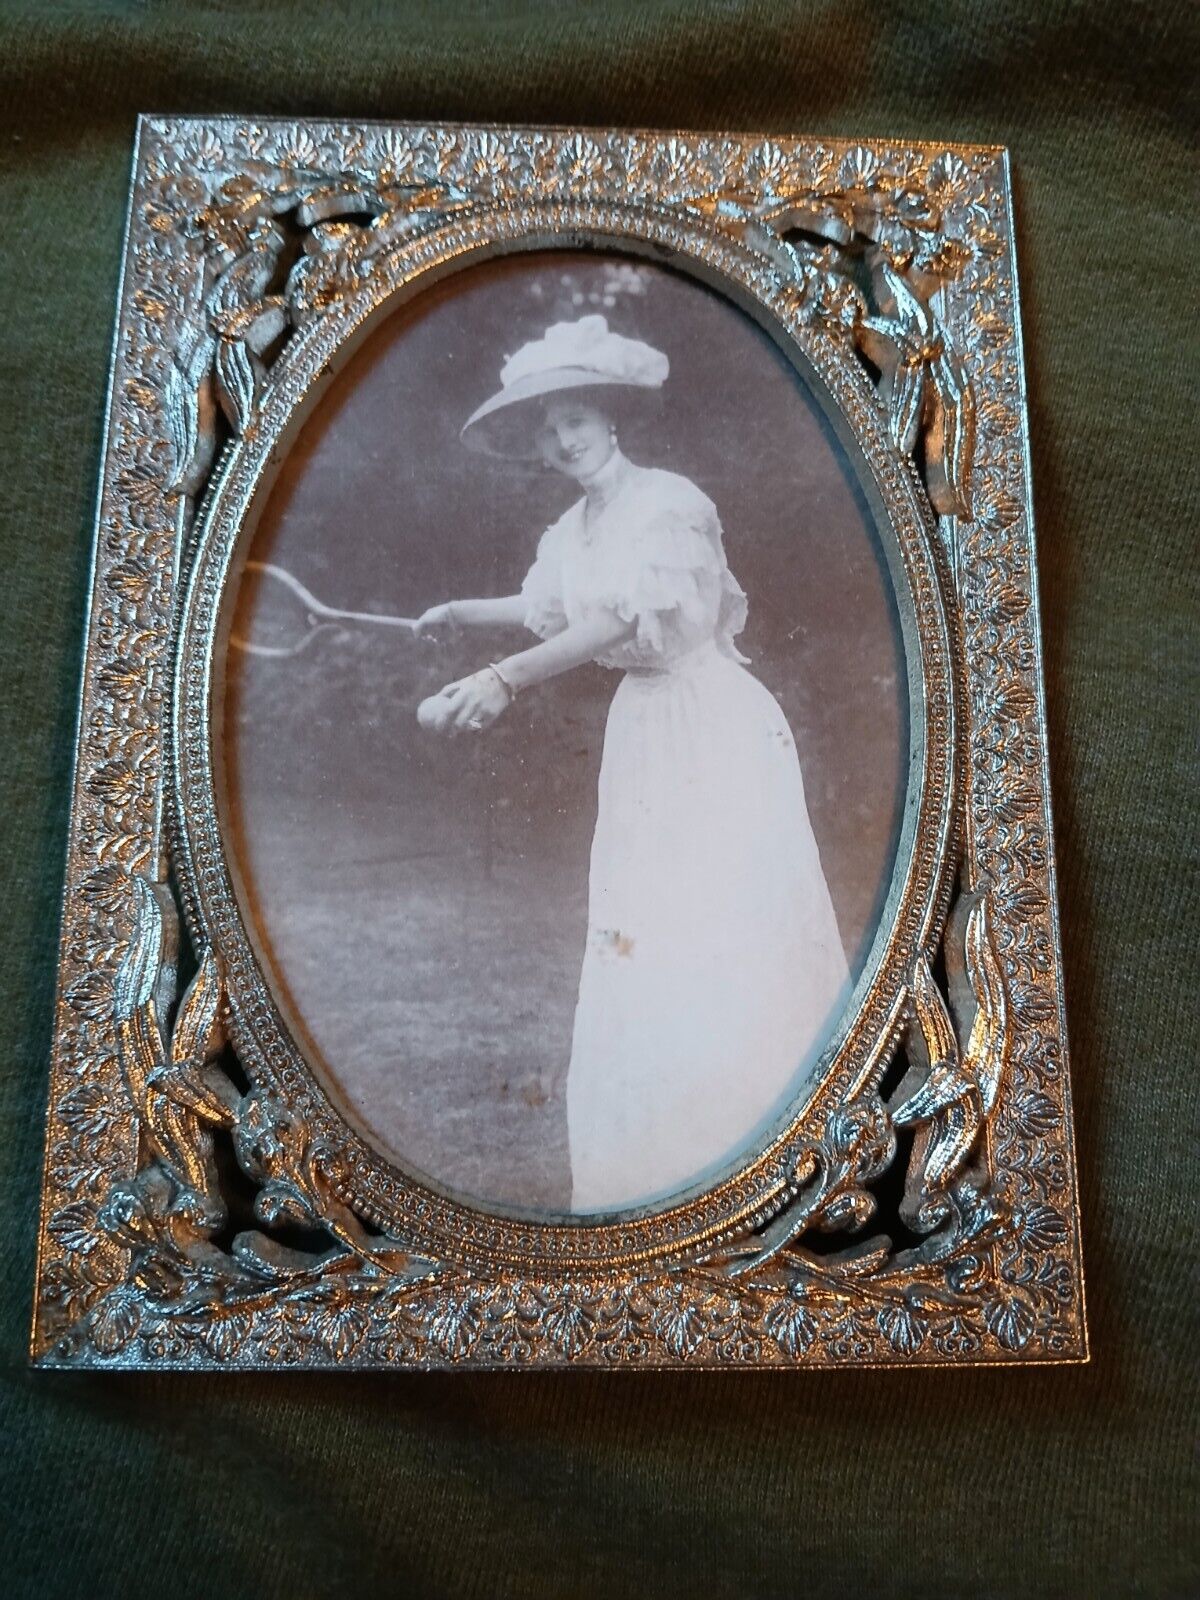 Antique Silverplate Picture Frame-Very Beautiful Item Rare